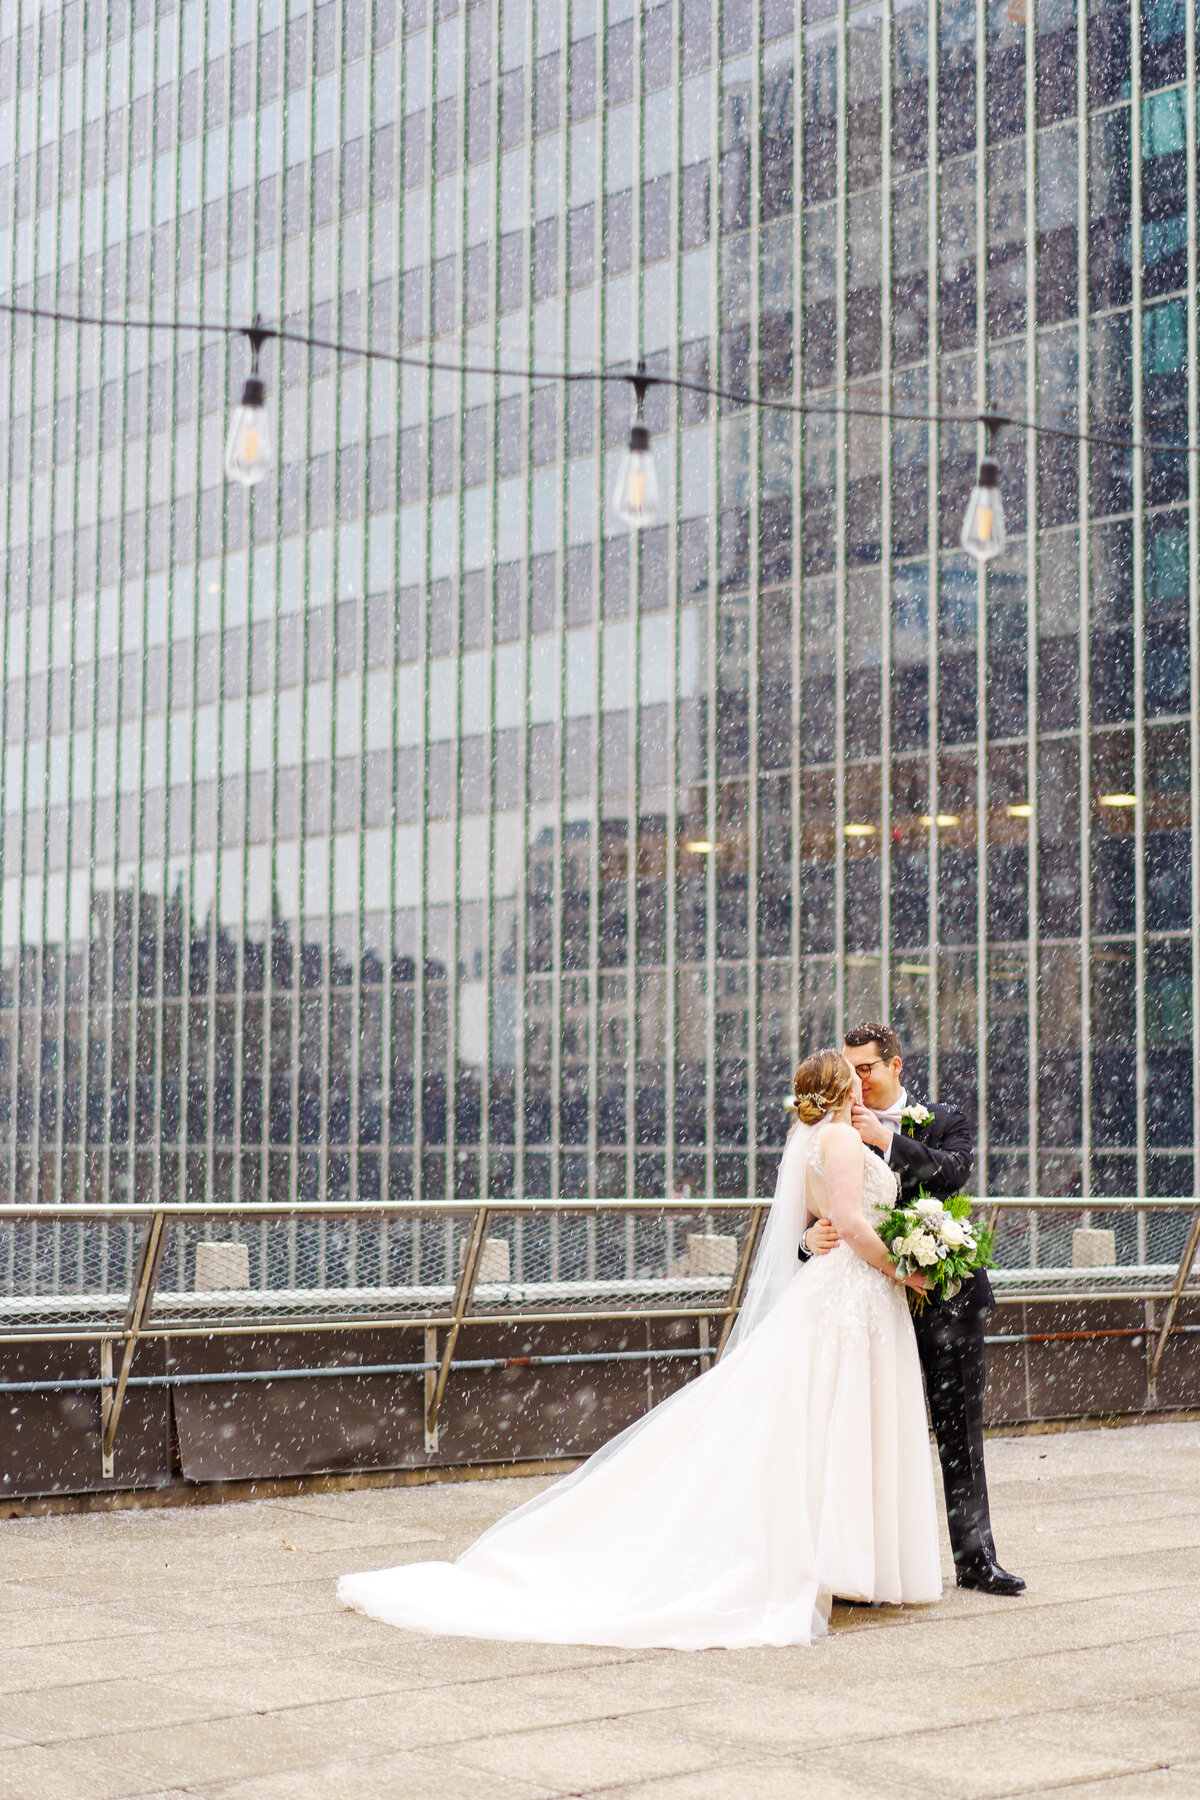 Bride and groom kiss under industrial lights atop a roof in downtown Columbus, Ohio as the snow falls.